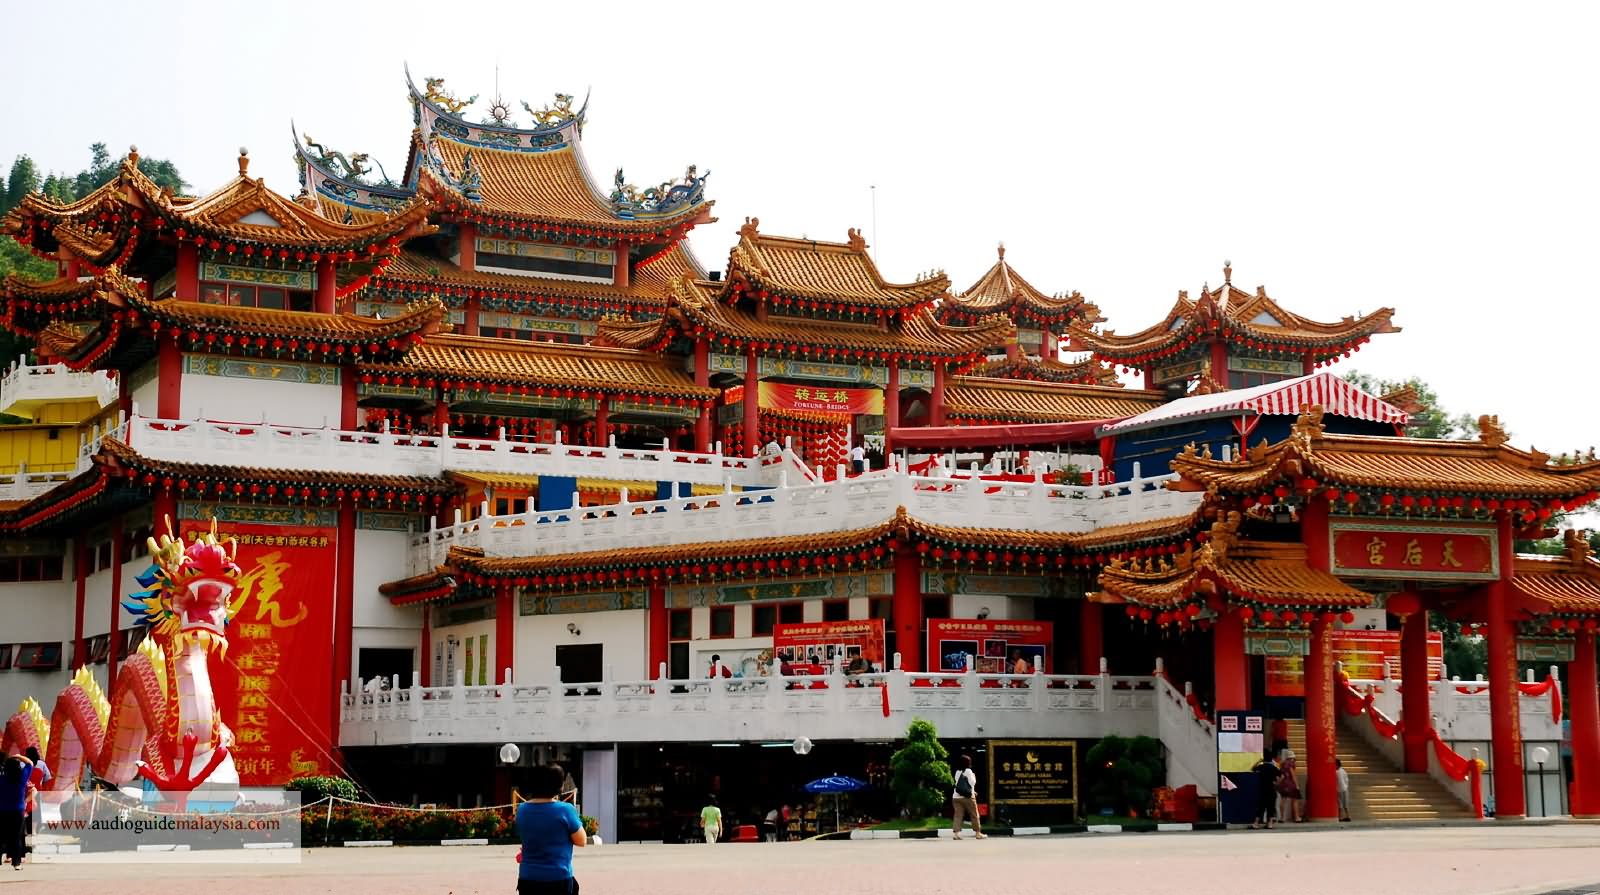 Beautiful Picture Of Thean Hou Temple, Malaysia